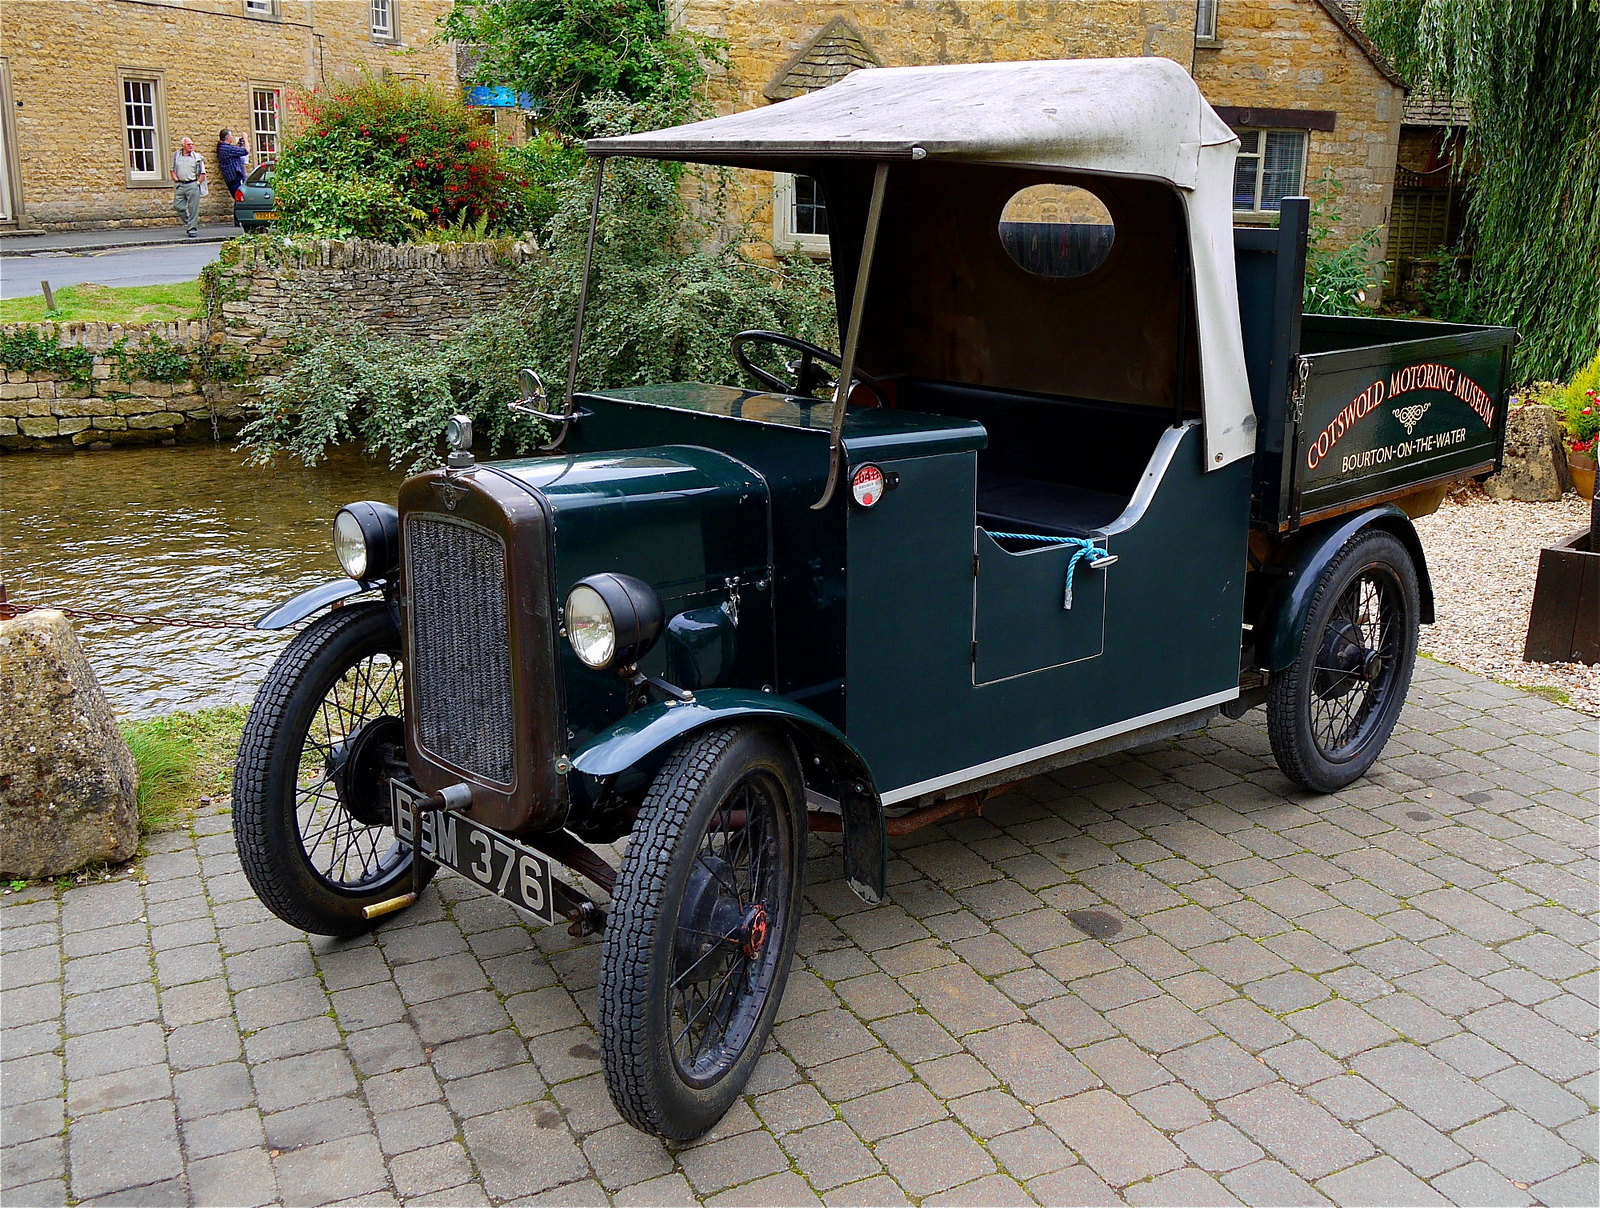 1937 Austin van at the Cotswolds Motor Museum in Bourton-on-the-water